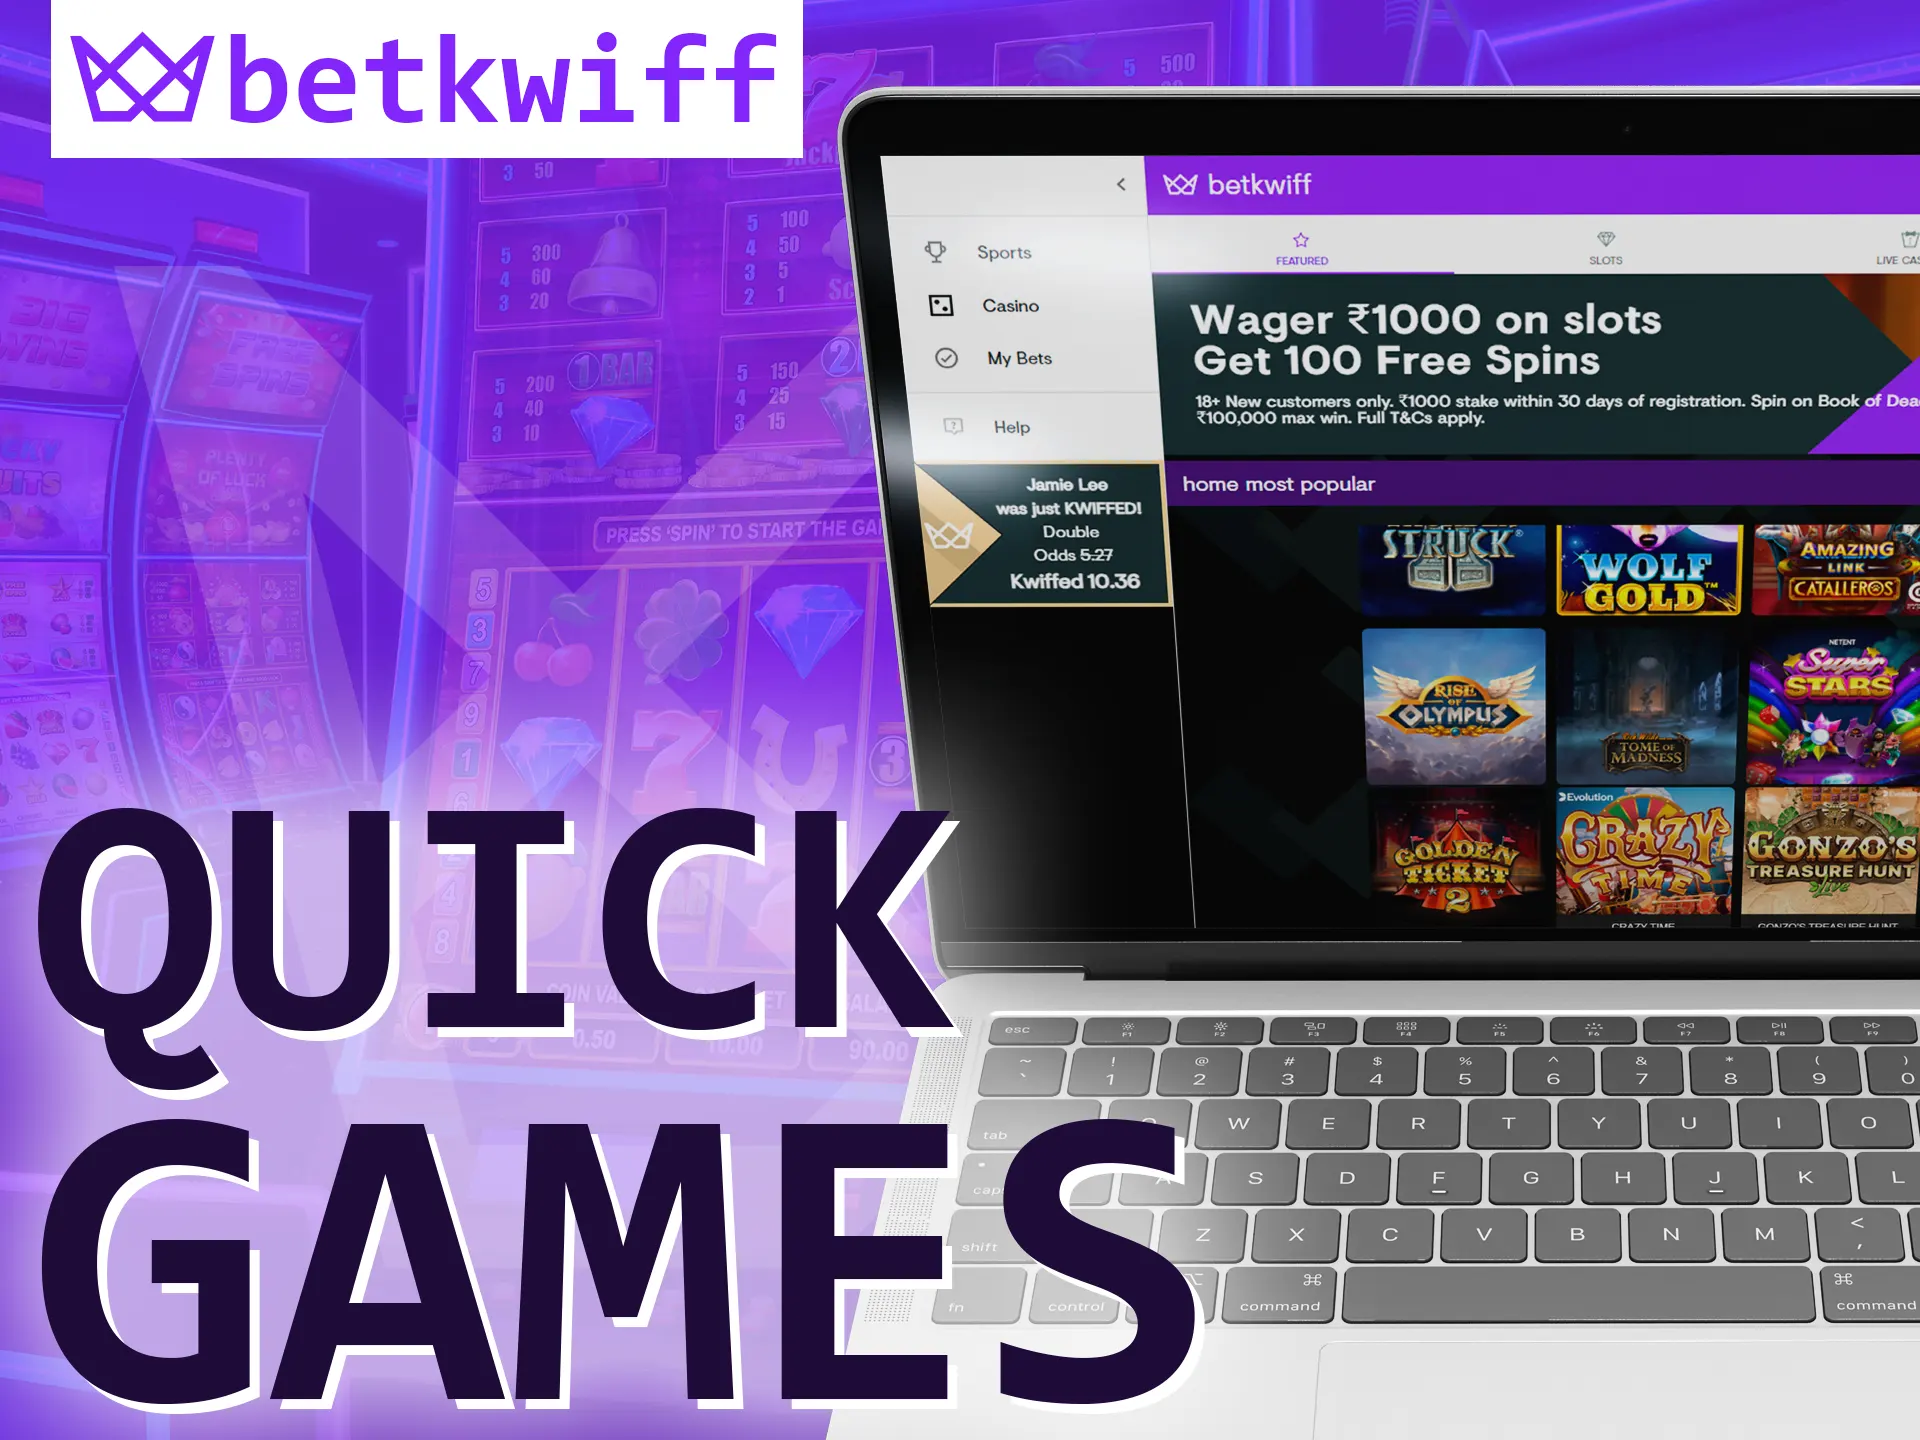 With Betkwiff, play quick casino games.